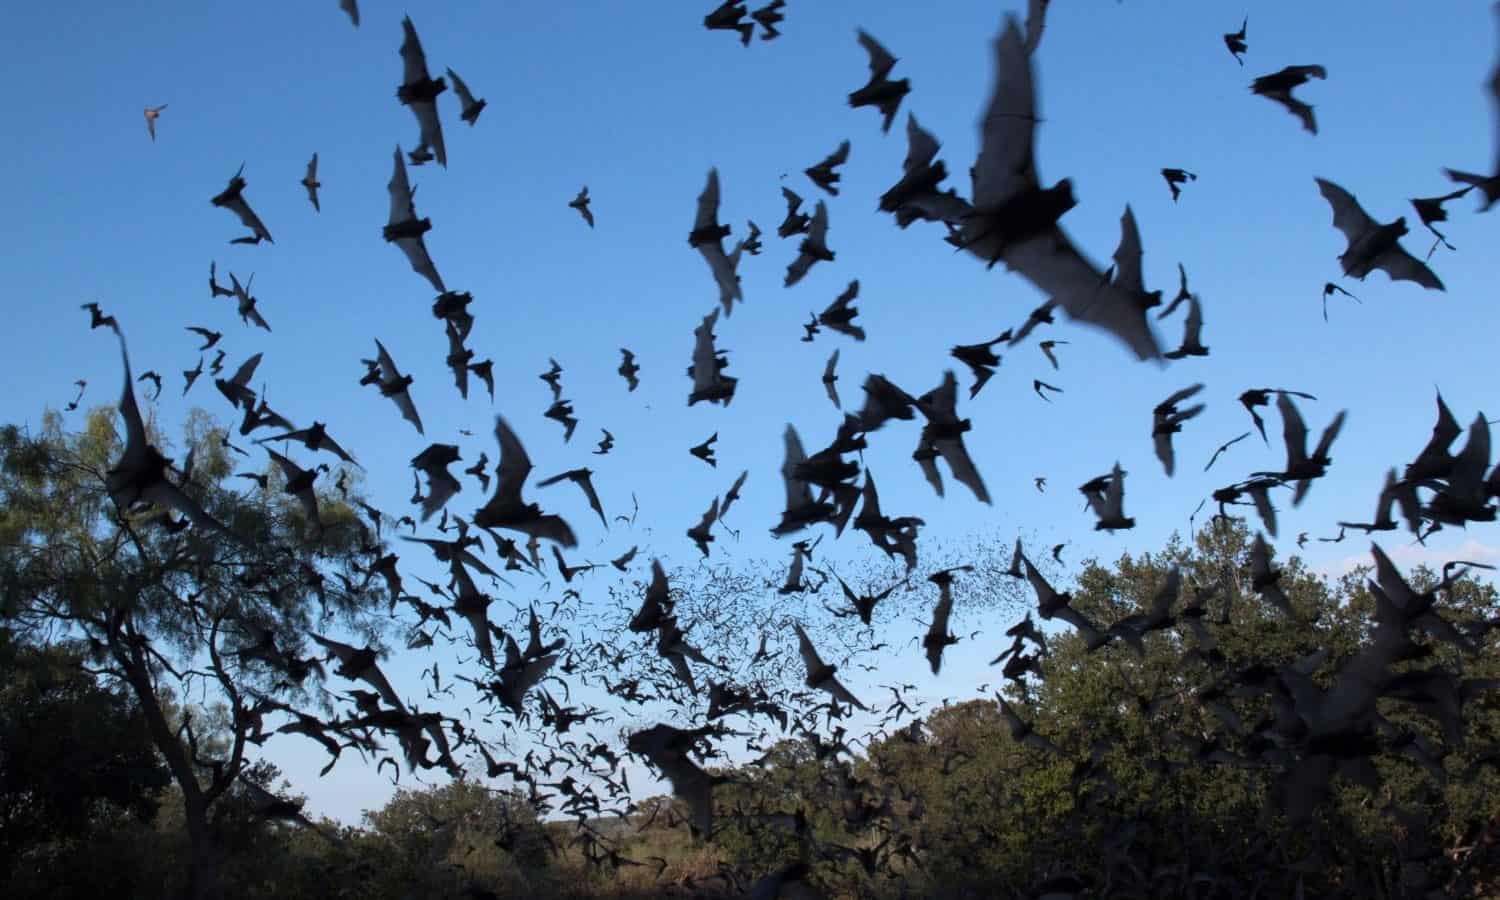 In exchange for protection from predators, stable temperatures, and safe shelter, bats take care of some damaging pests for gardeners.